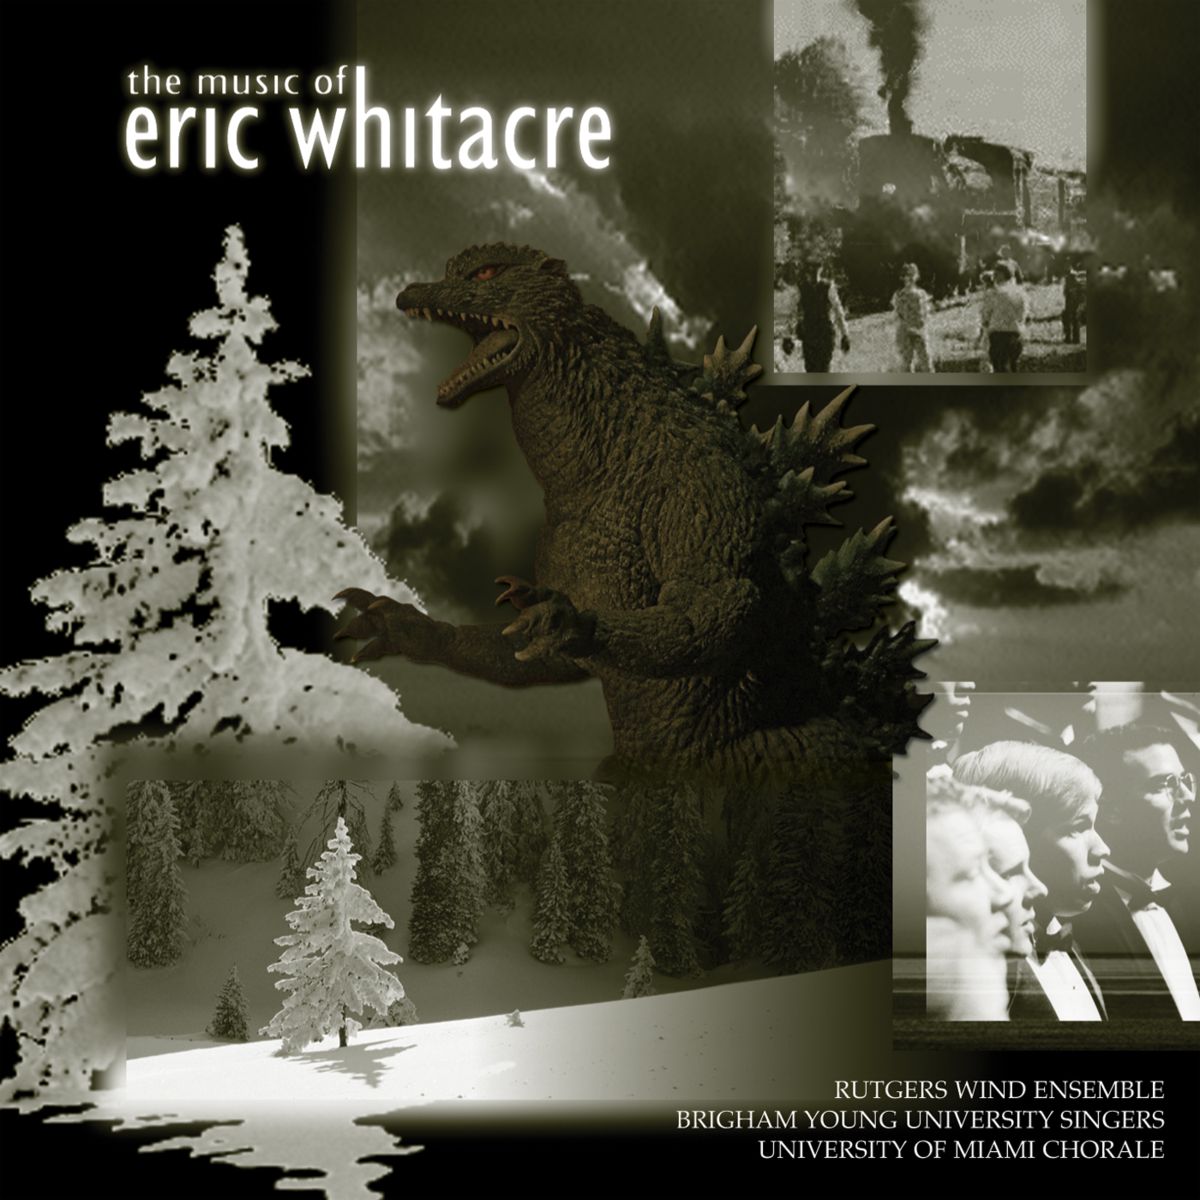 Music of Eric Whitacre, The - cliquer ici